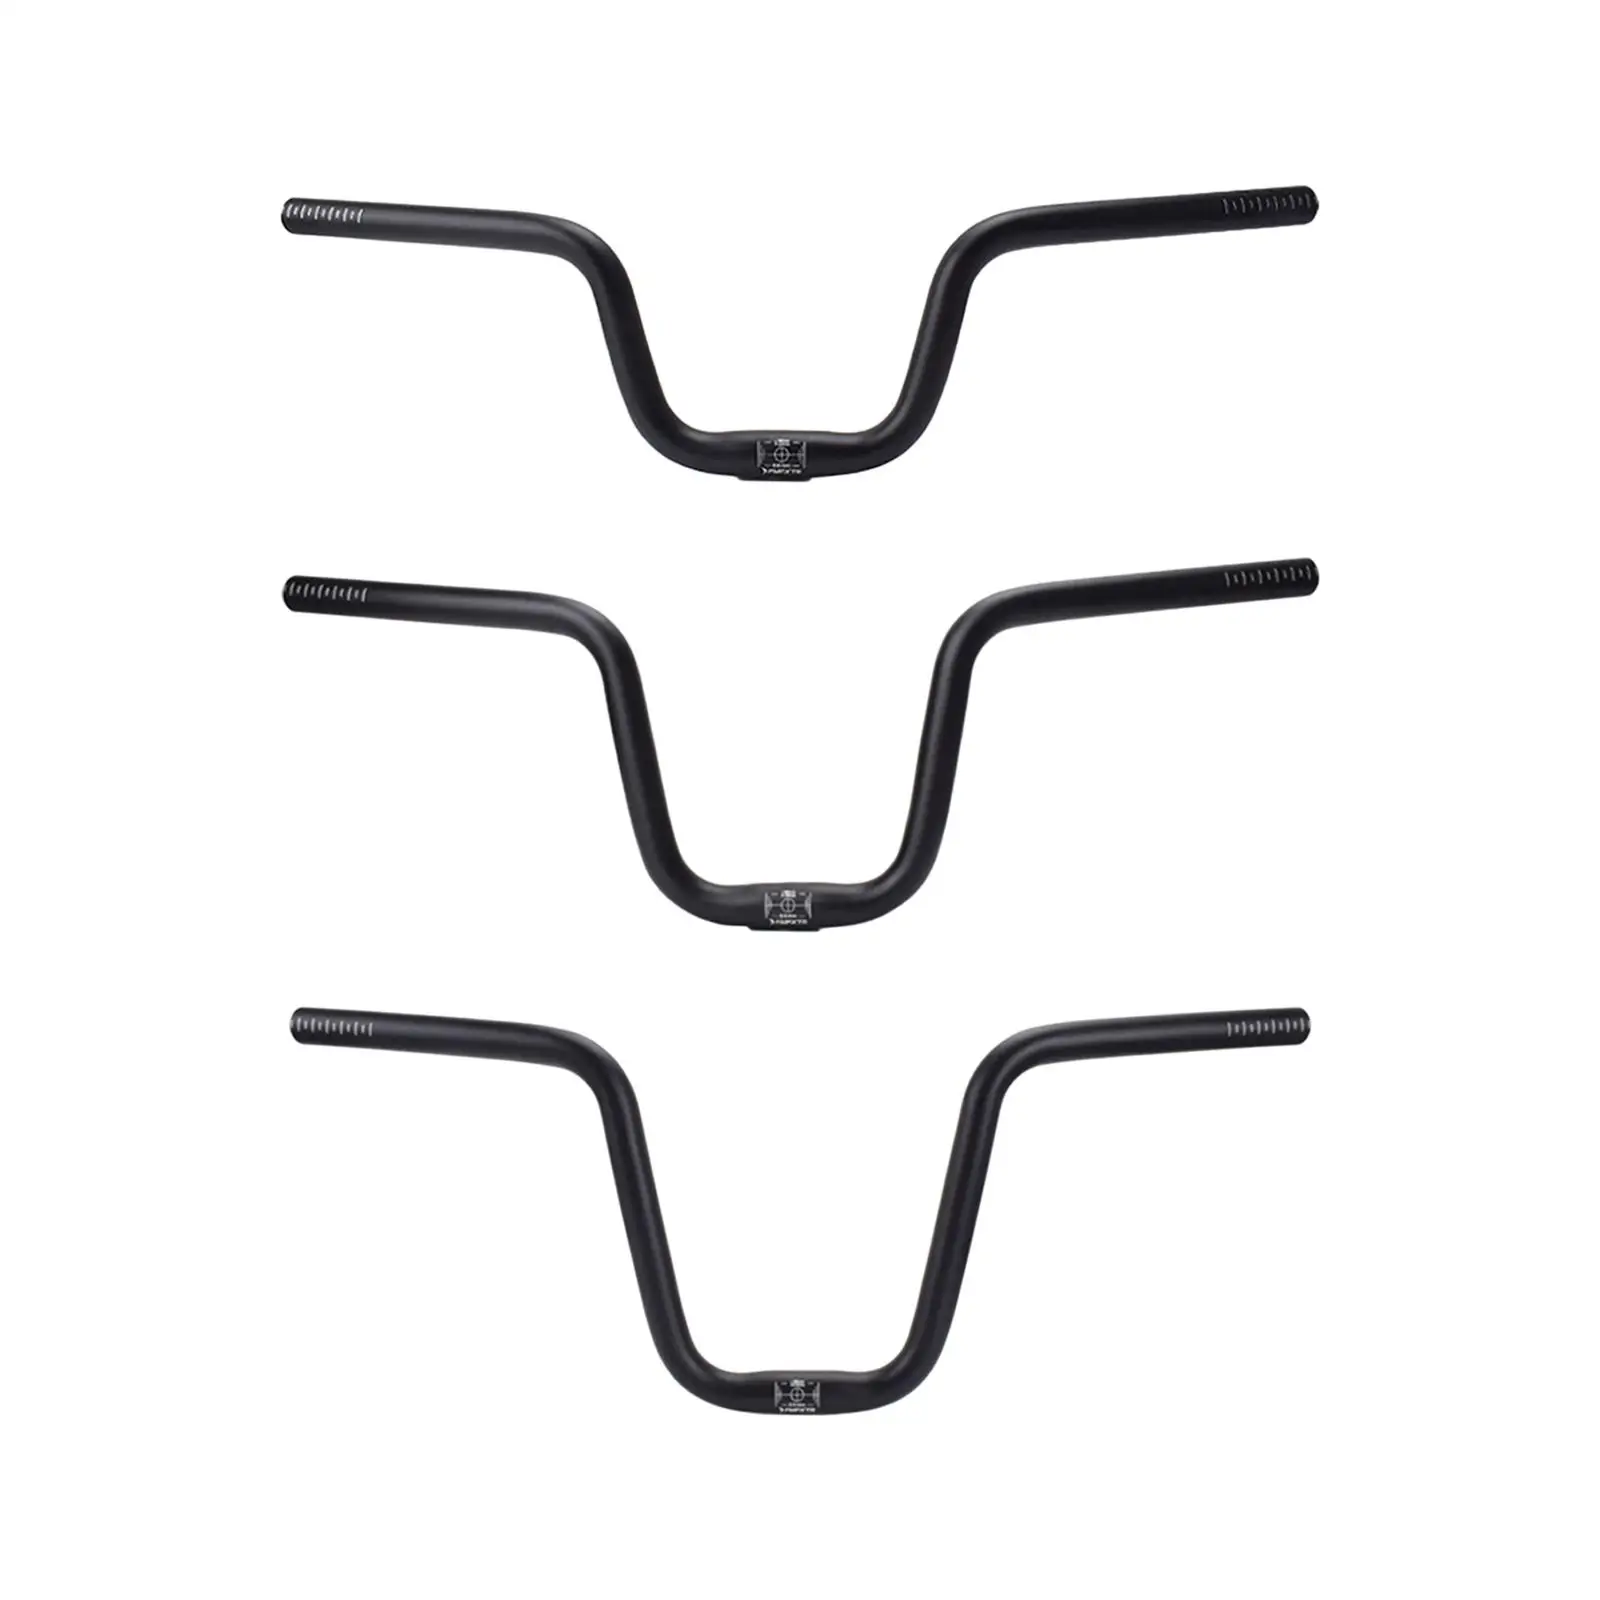 Folding Bike Handlebar Cycling Handle 1 inch Clamp 22.2mm Accessories Riser Bars for Road Bike BMX Outdoor Activities Riding